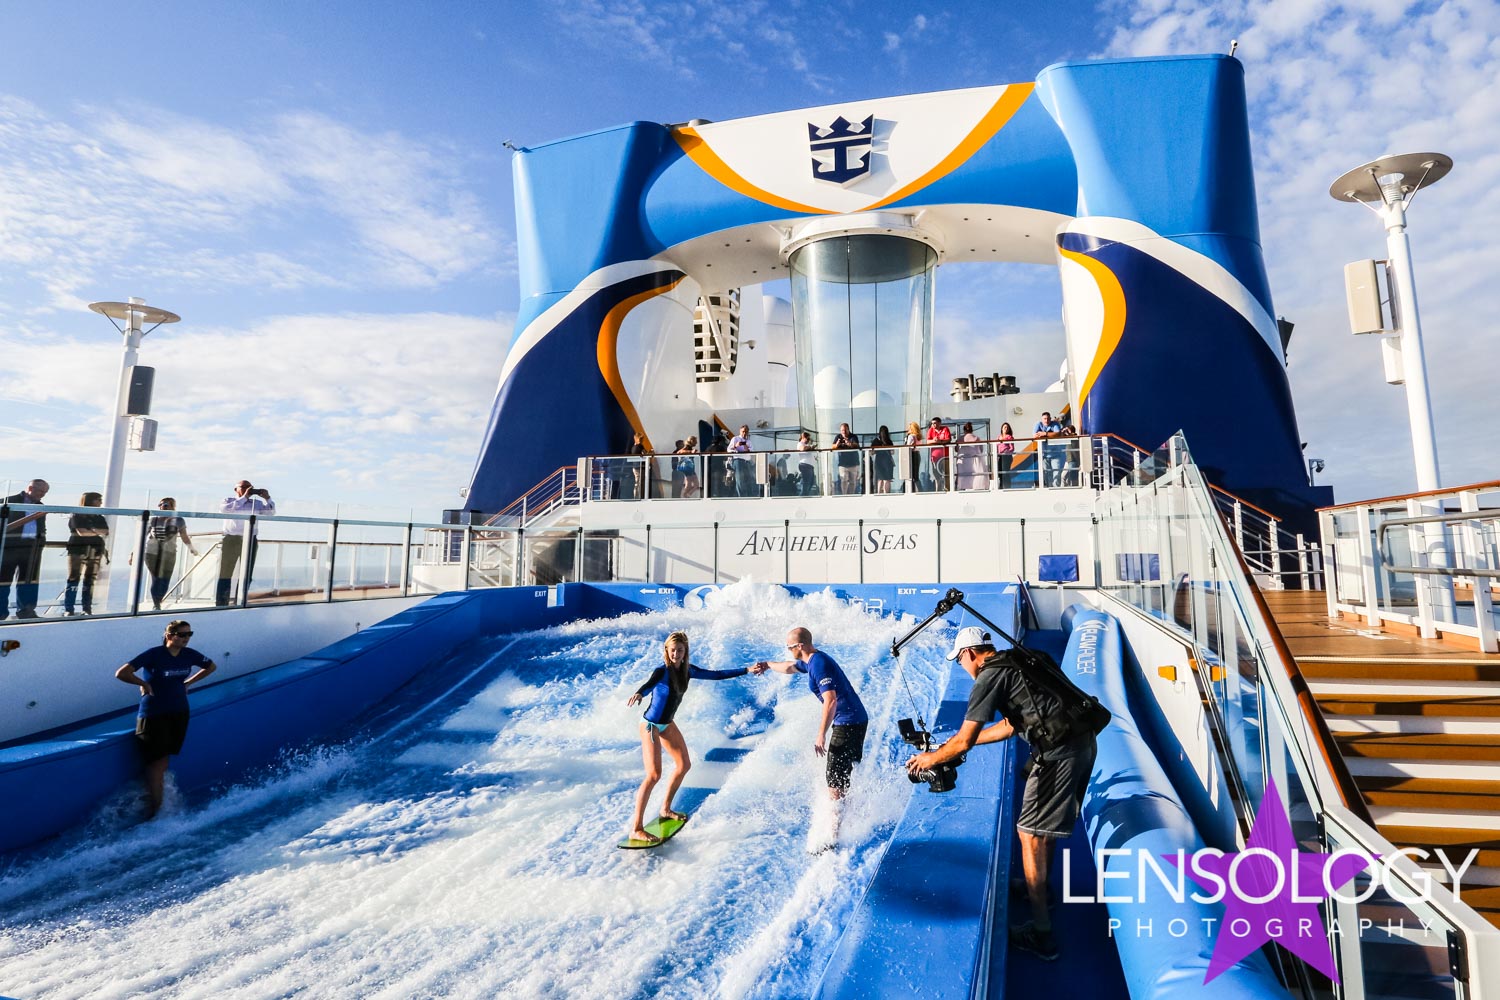 LENSOLOGY.NET - Flowrider photocall with Dancing With The Stars cast members aboard Royal Caribbeans Anthem Of The Seas, New Jersey. All images are copyright of Lensology.net Email: info@lensology.net www.lensology.net